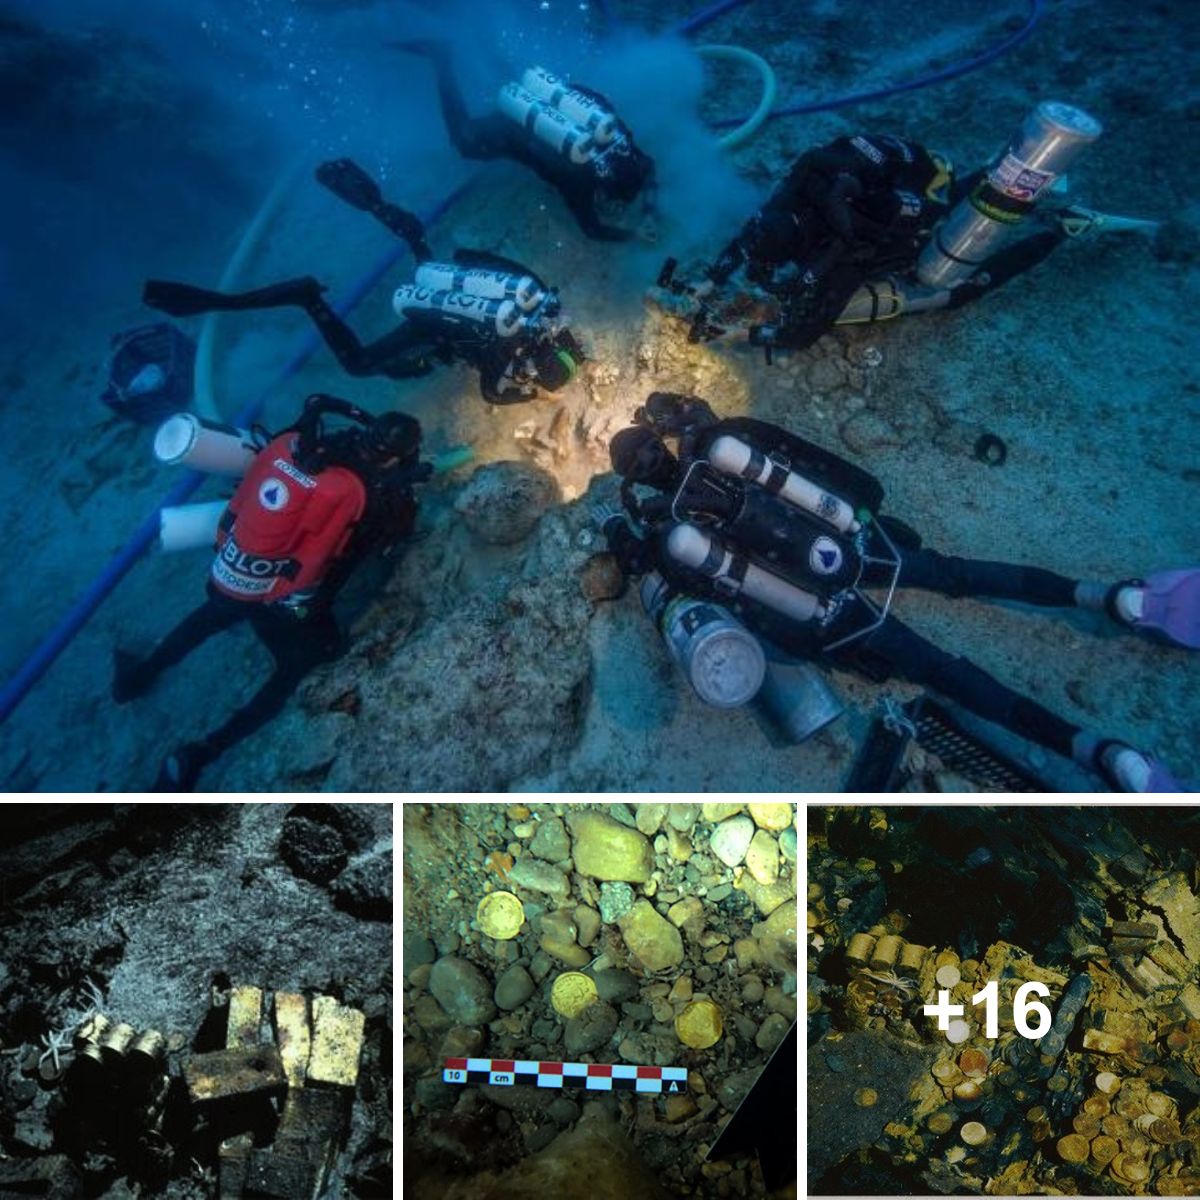 Archɑeology Bombshell: Shipwreck’s ‘Chest Of Gold’ Discovery Could Solve 16th Century Mystery